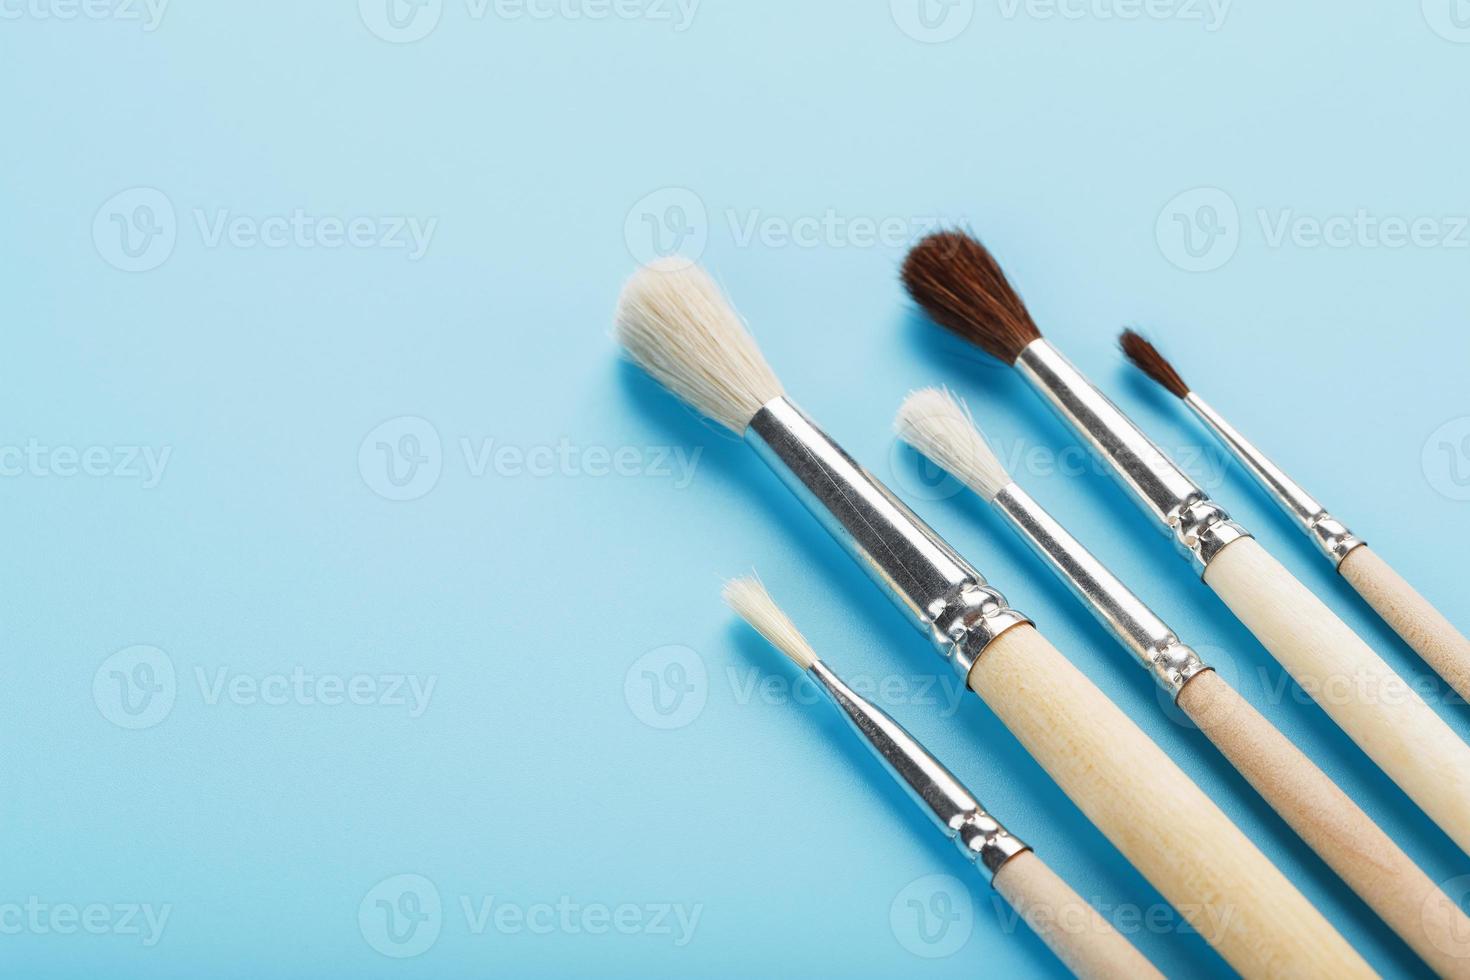 Brushes for drawing with paints made of natural wood and wool on a blue background. photo